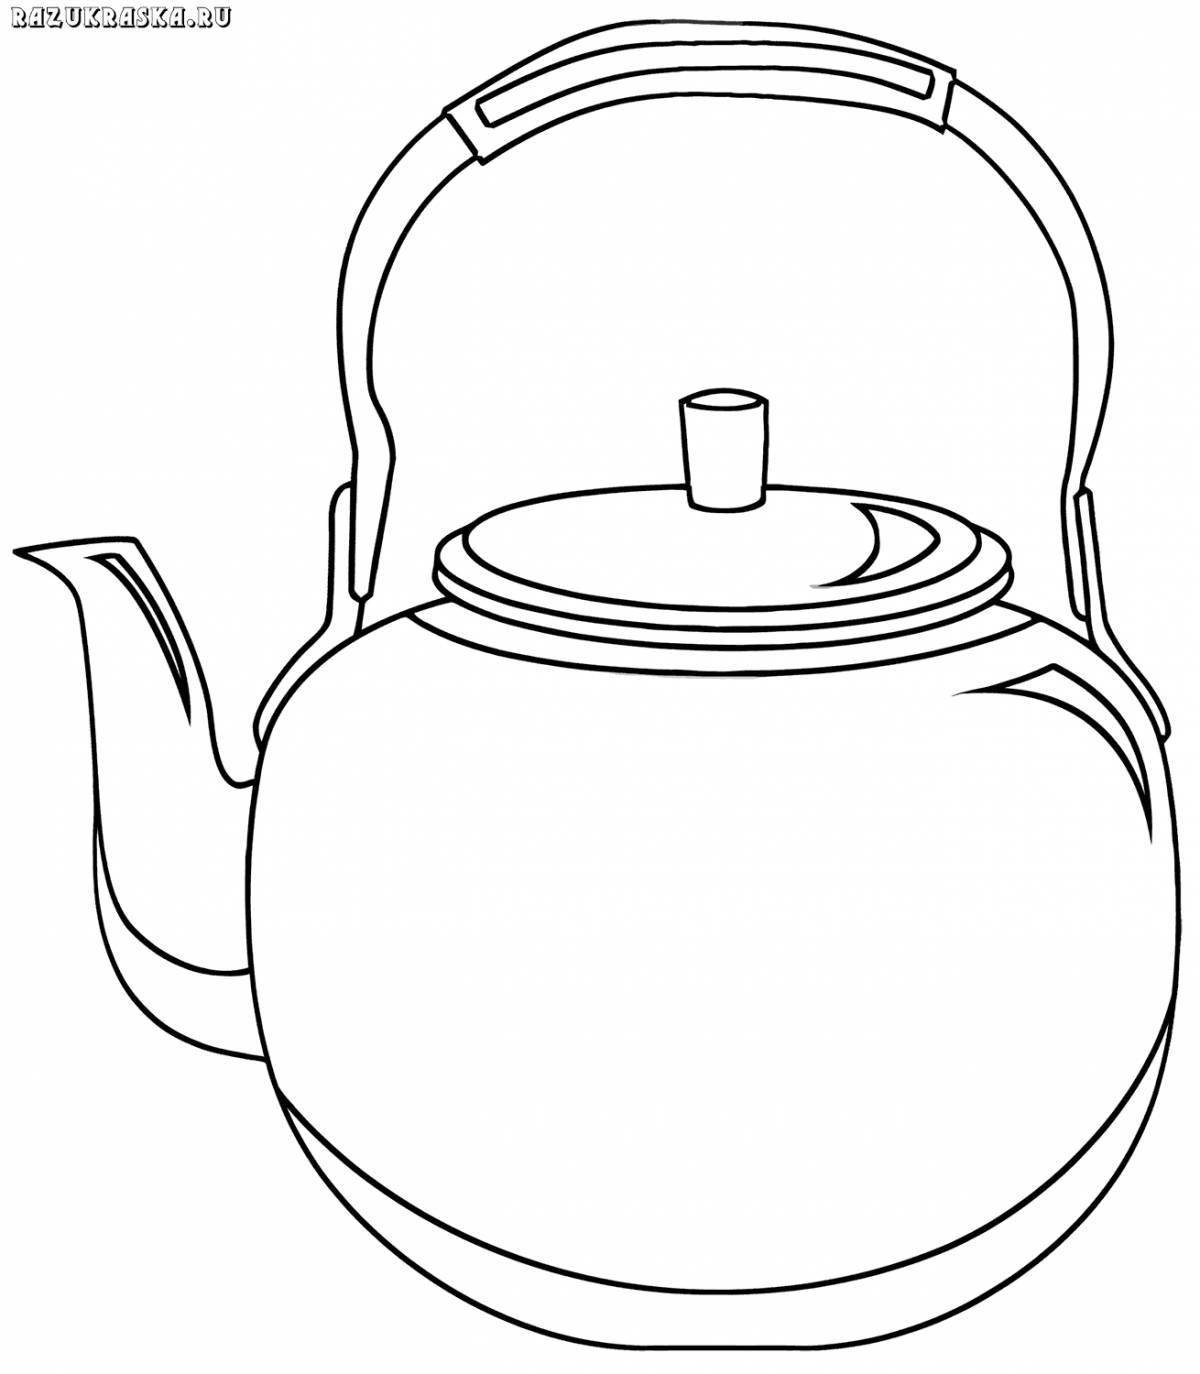 Playful teapot coloring for 4-5 year olds